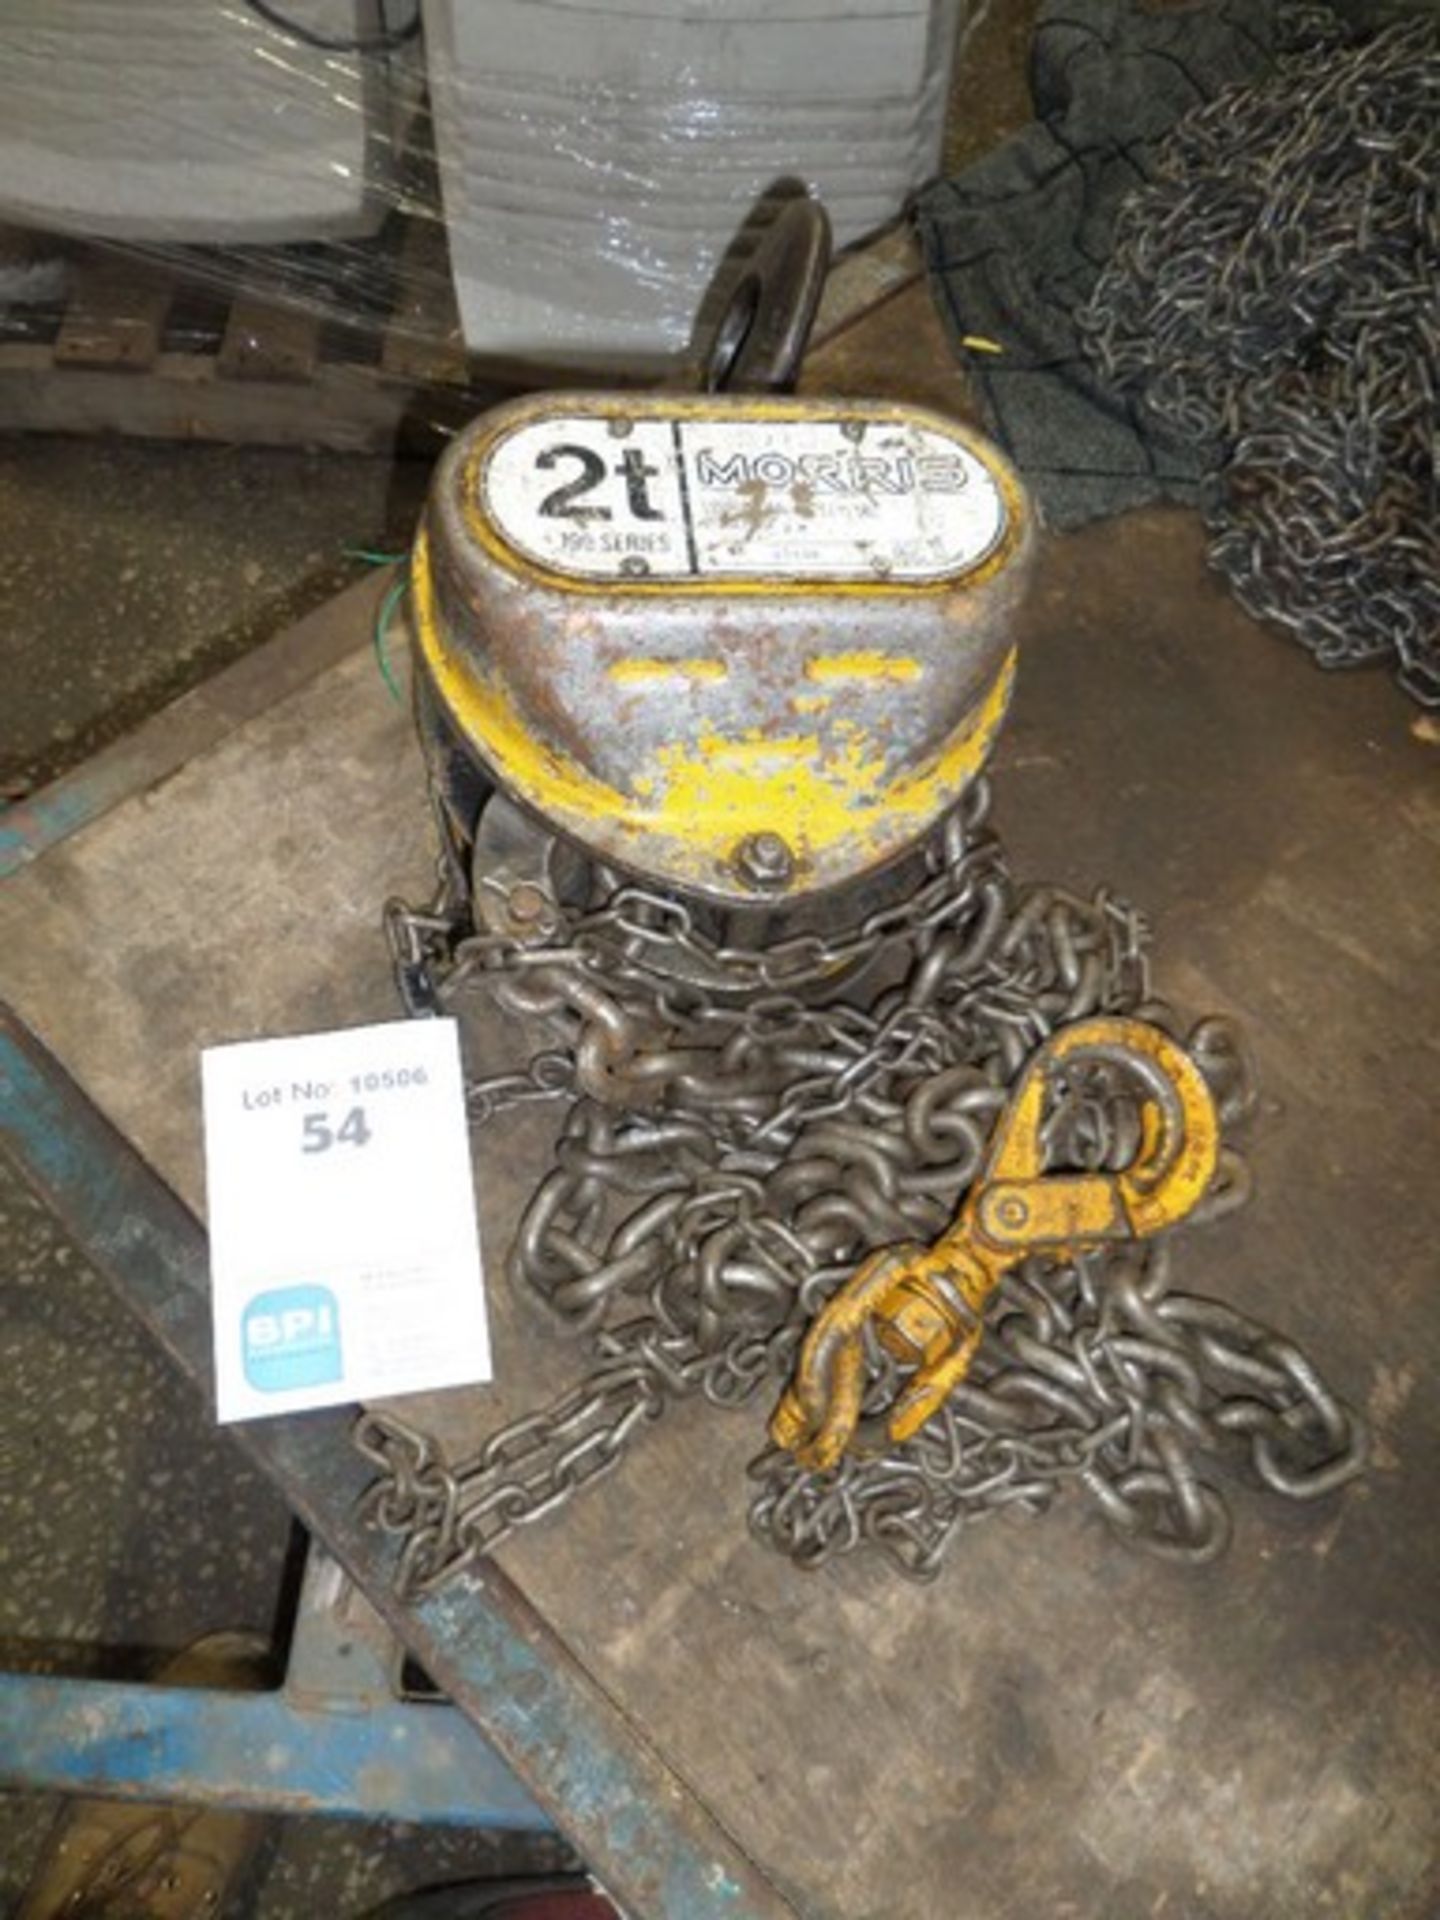 MORRIS 2t 190 series {015276} 2000KG CHAIN HOIST-3M LIFT Tested and is in good working order.